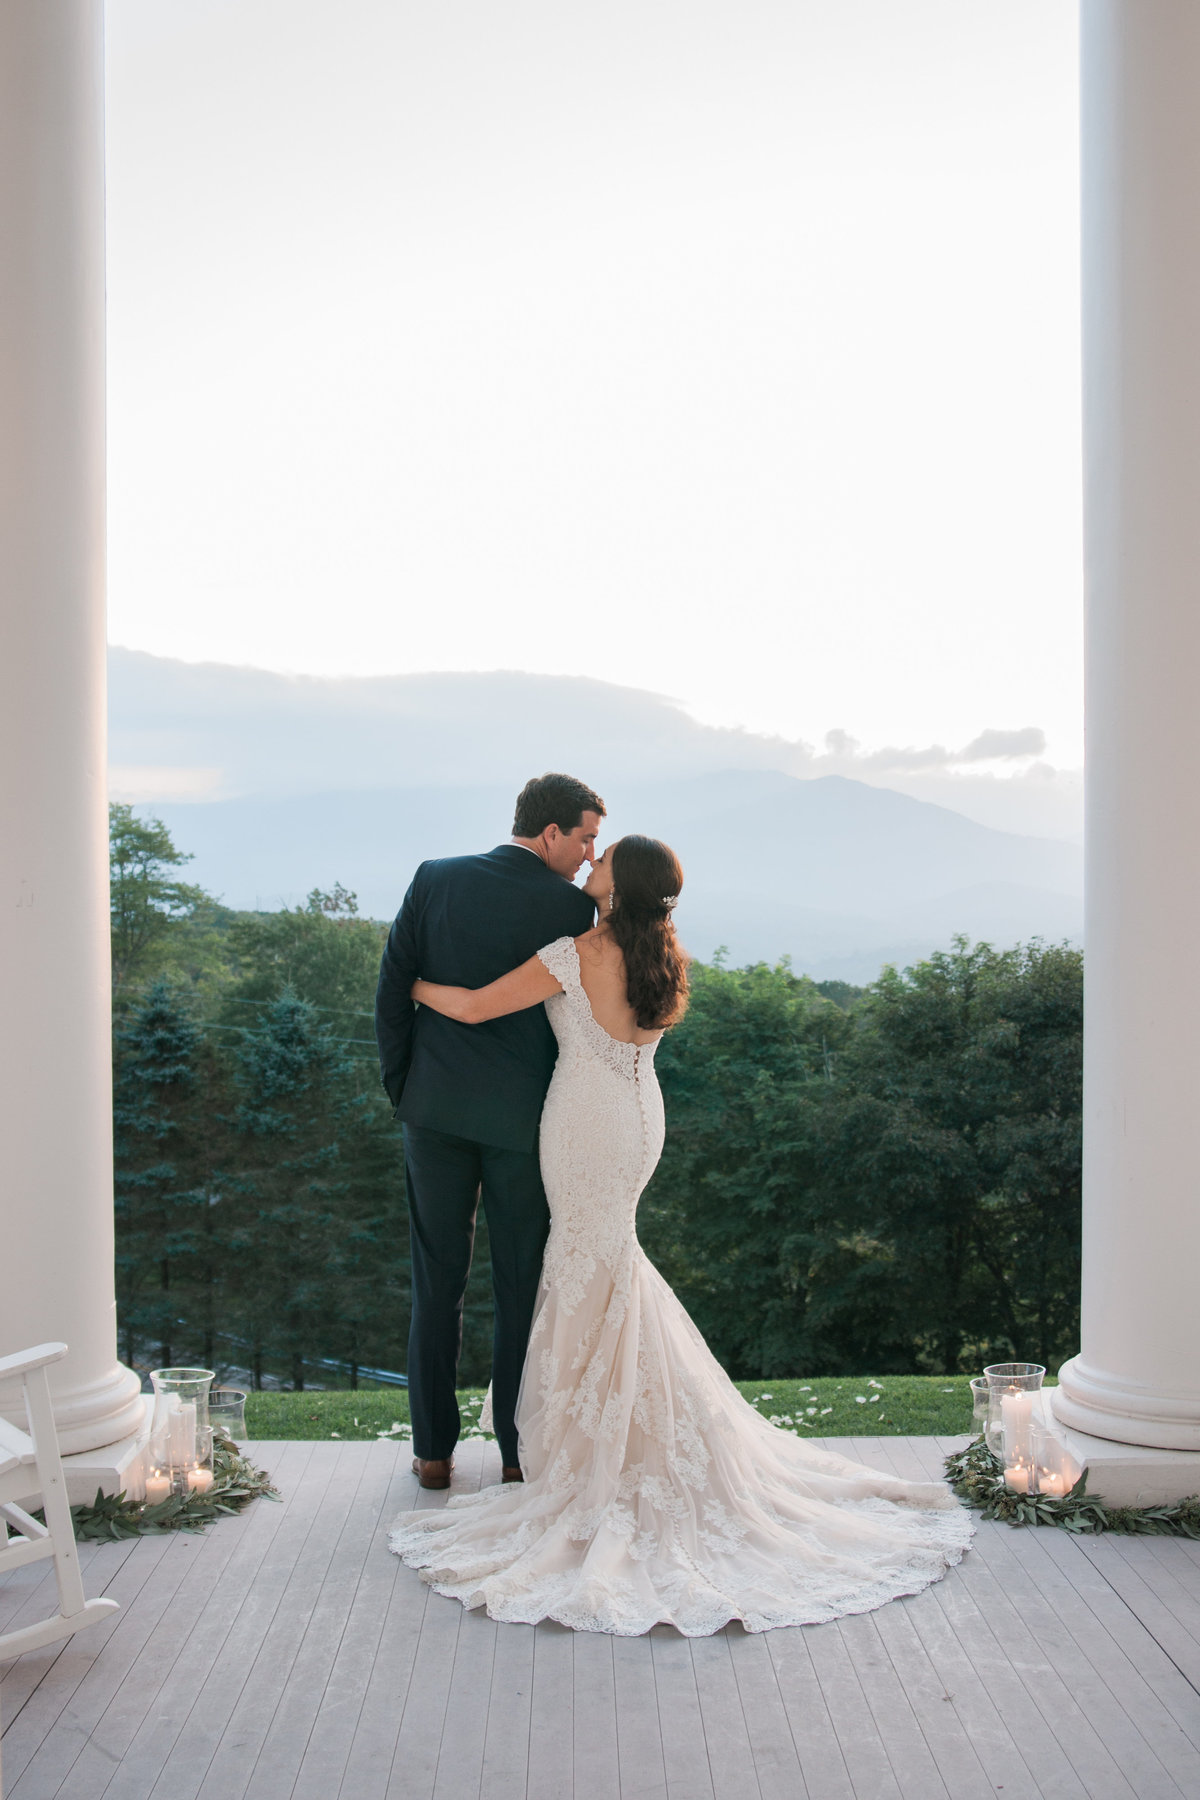 Destination wedding ceremony photographed at Westglow Resort by Boone Photographer Wayfaring Wanderer. Westglow is a gorgeous venue in Blowing Rock, NC.